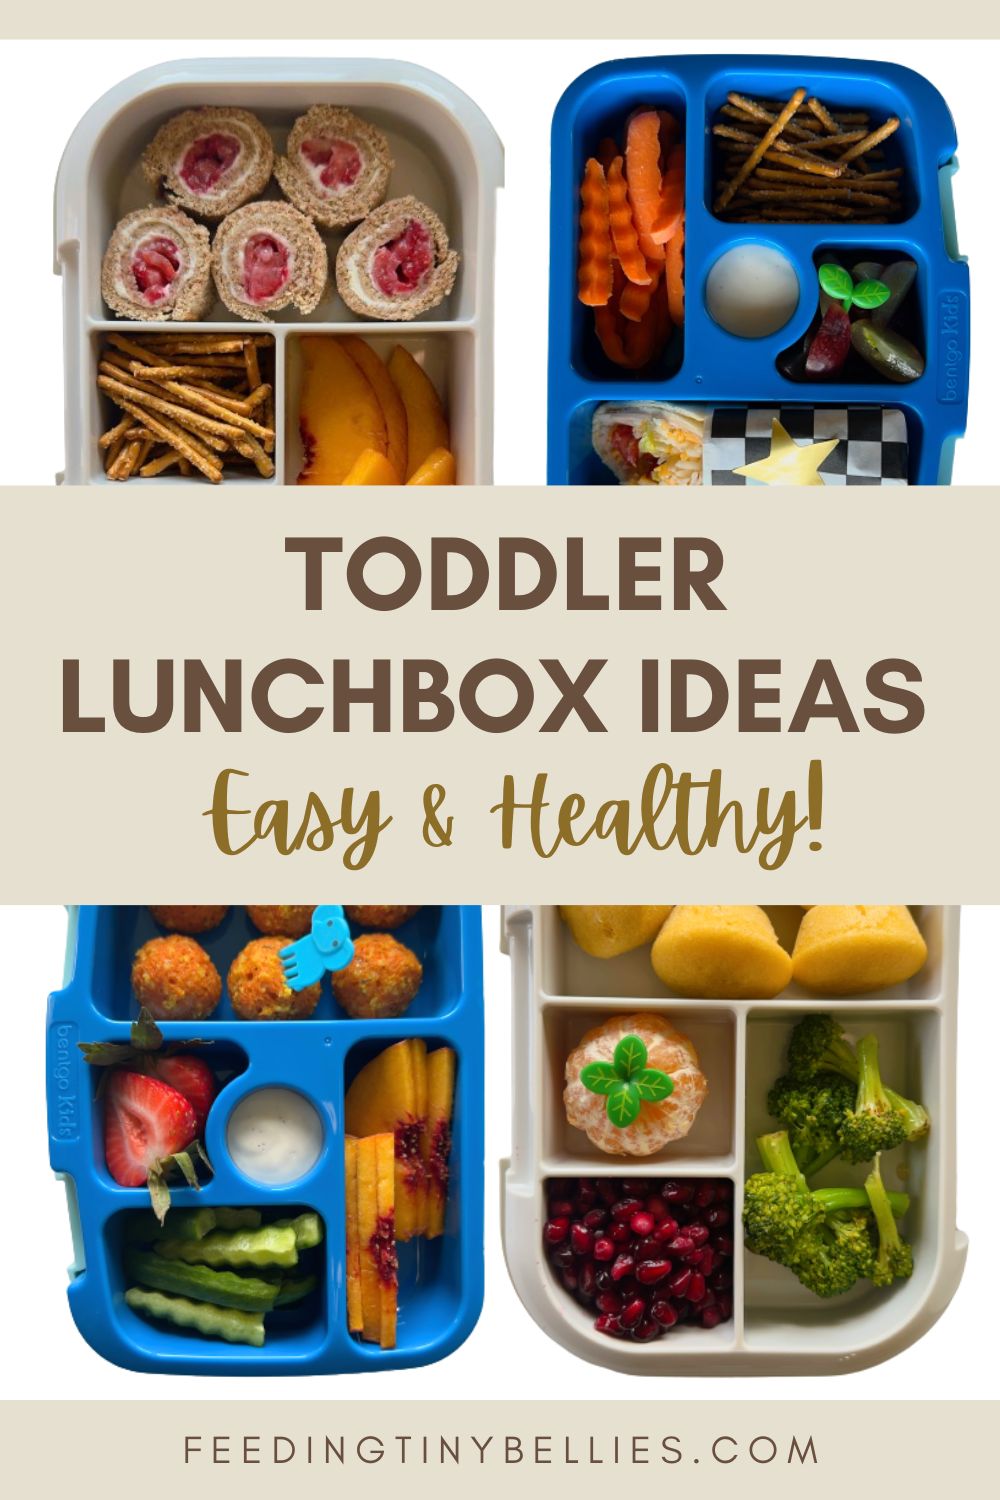 Toddler lunchbox ideas (easy and healthy).